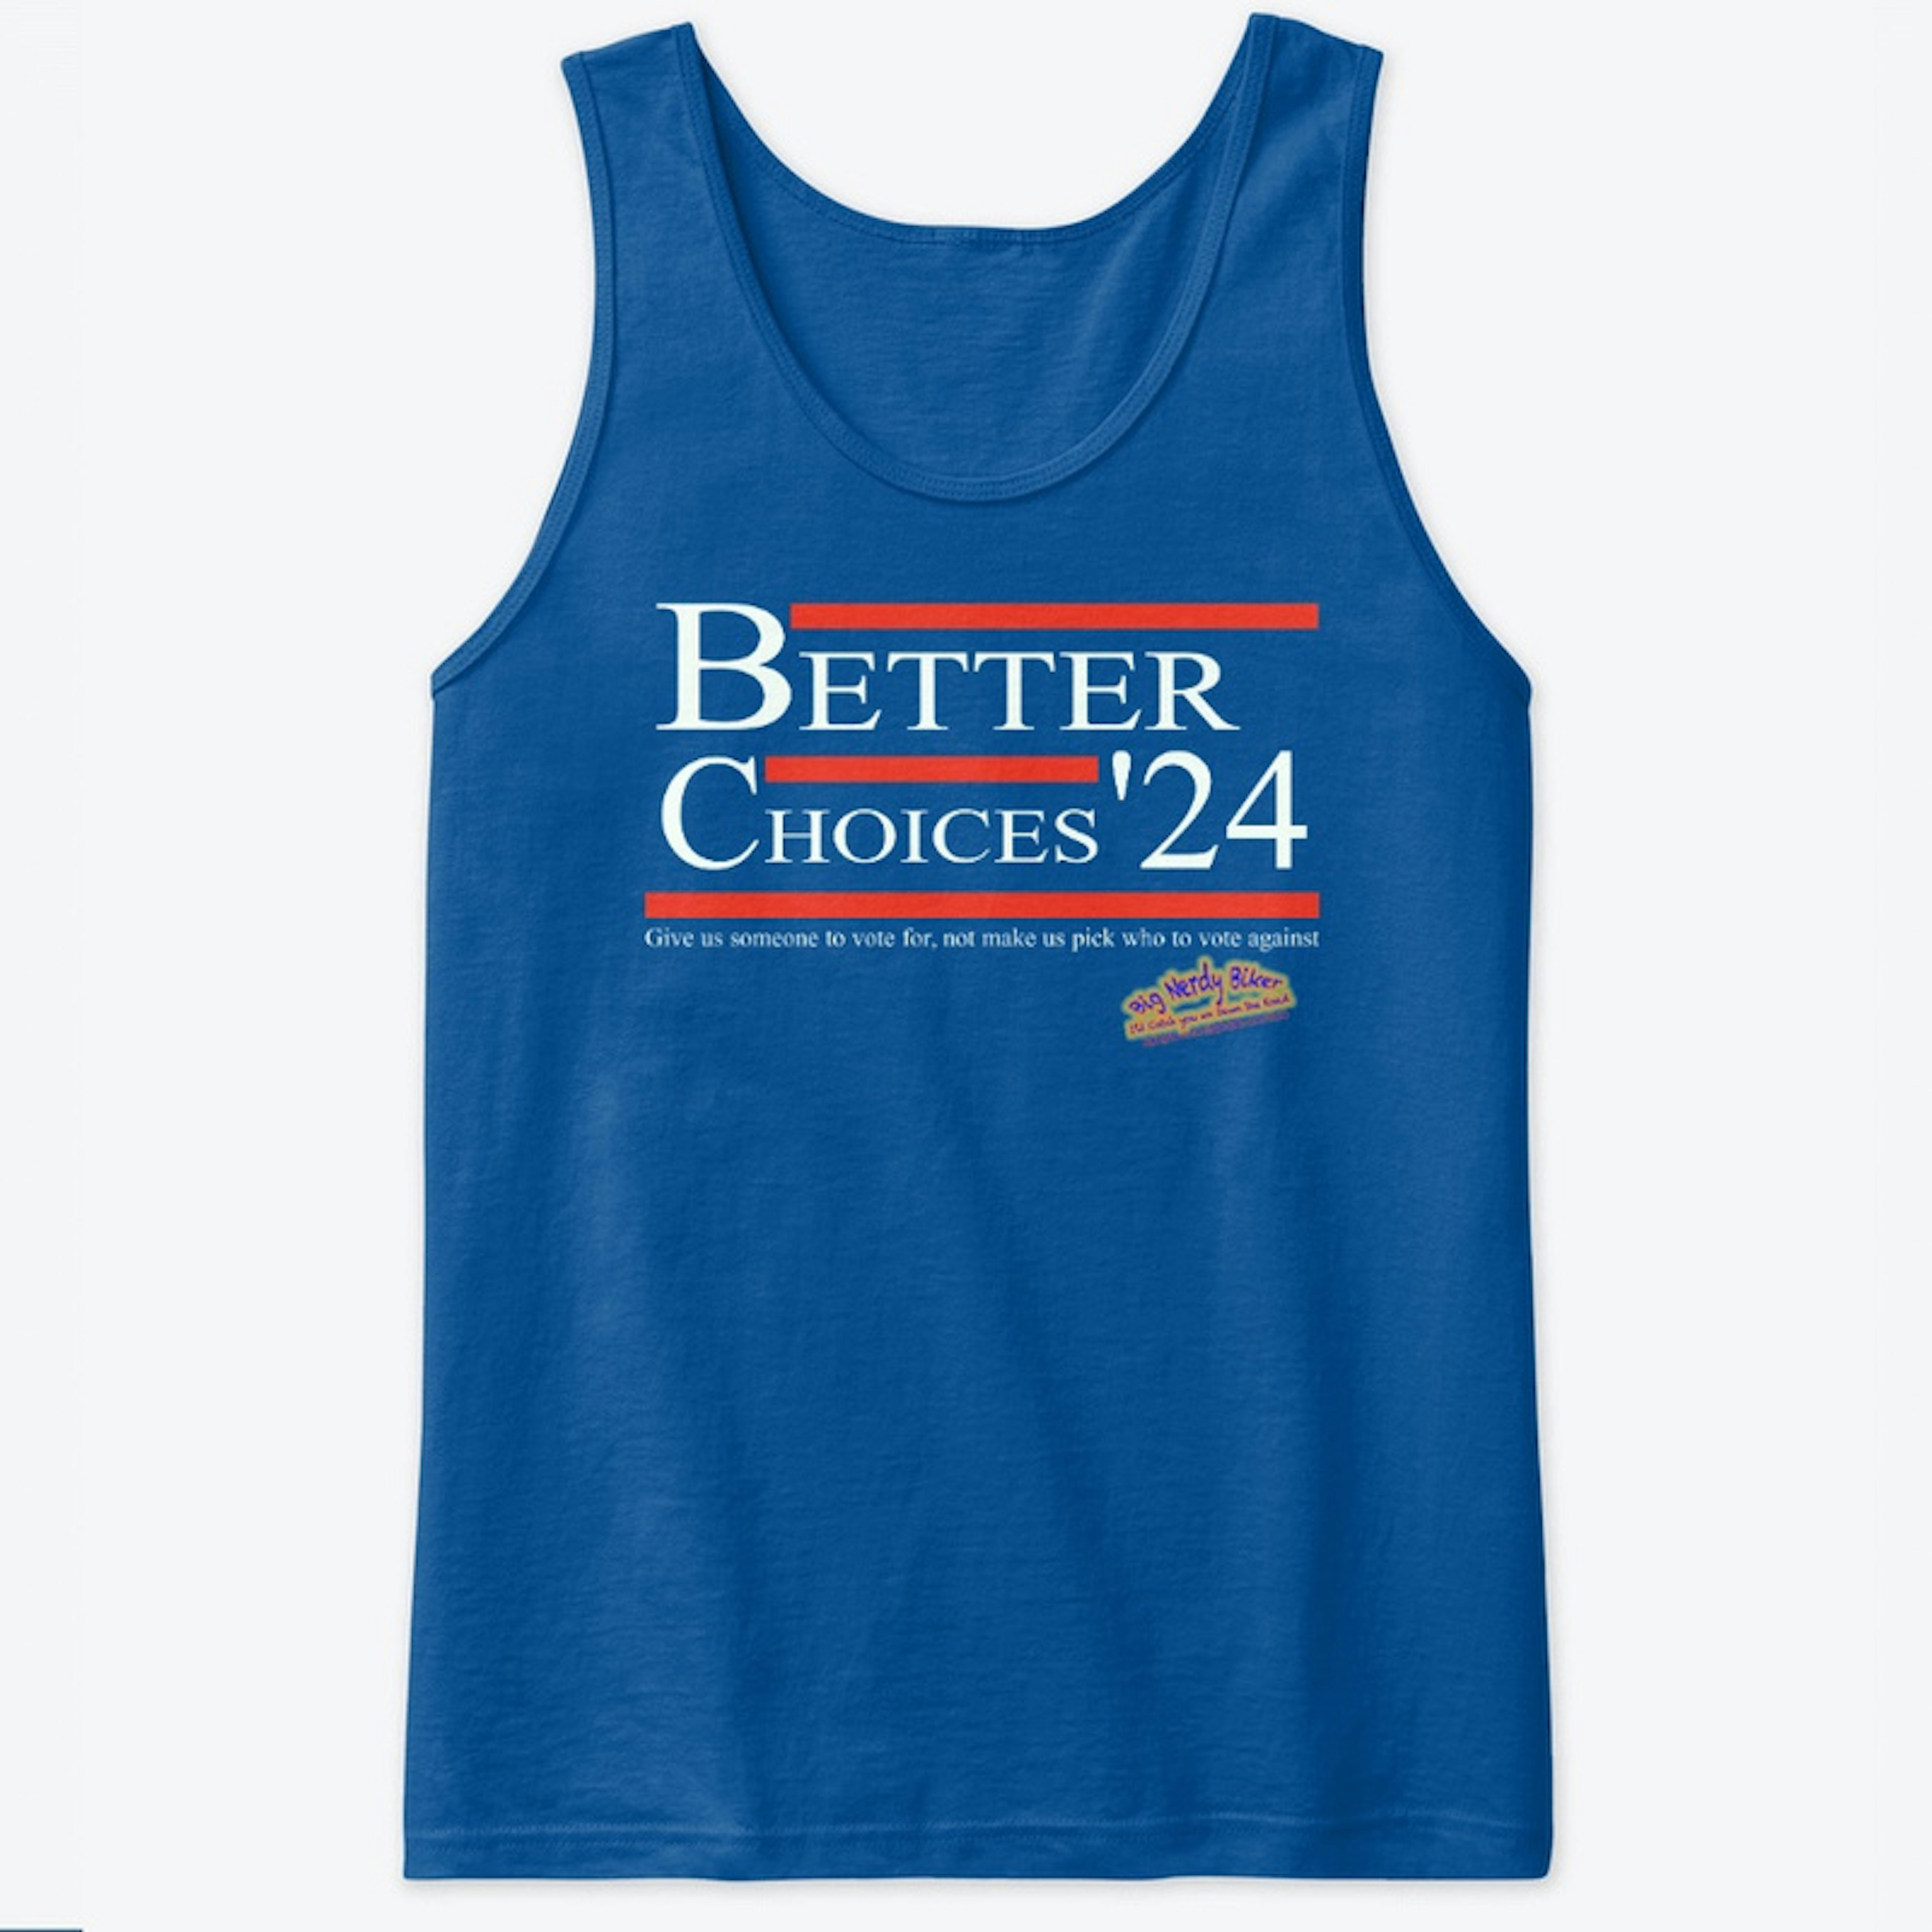 Better Choices '24